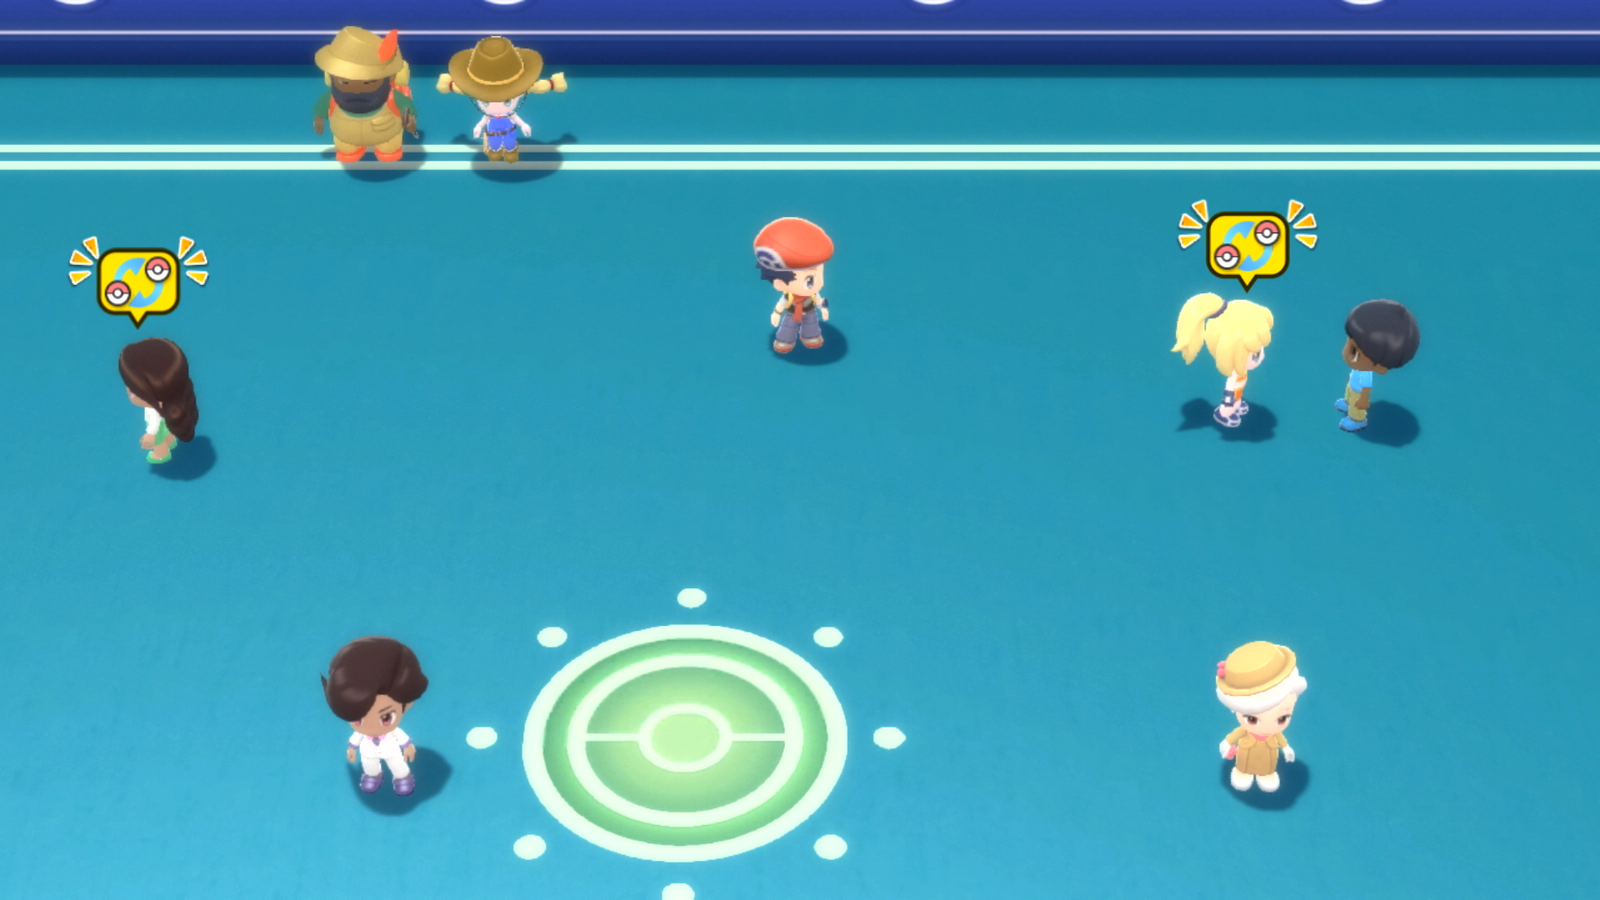 The multiplayer area downstairs in the Pokémon Centre, where Pokémon Trainers can battle and trade online in Pokémon Brilliant Diamond and Shining Pearl.